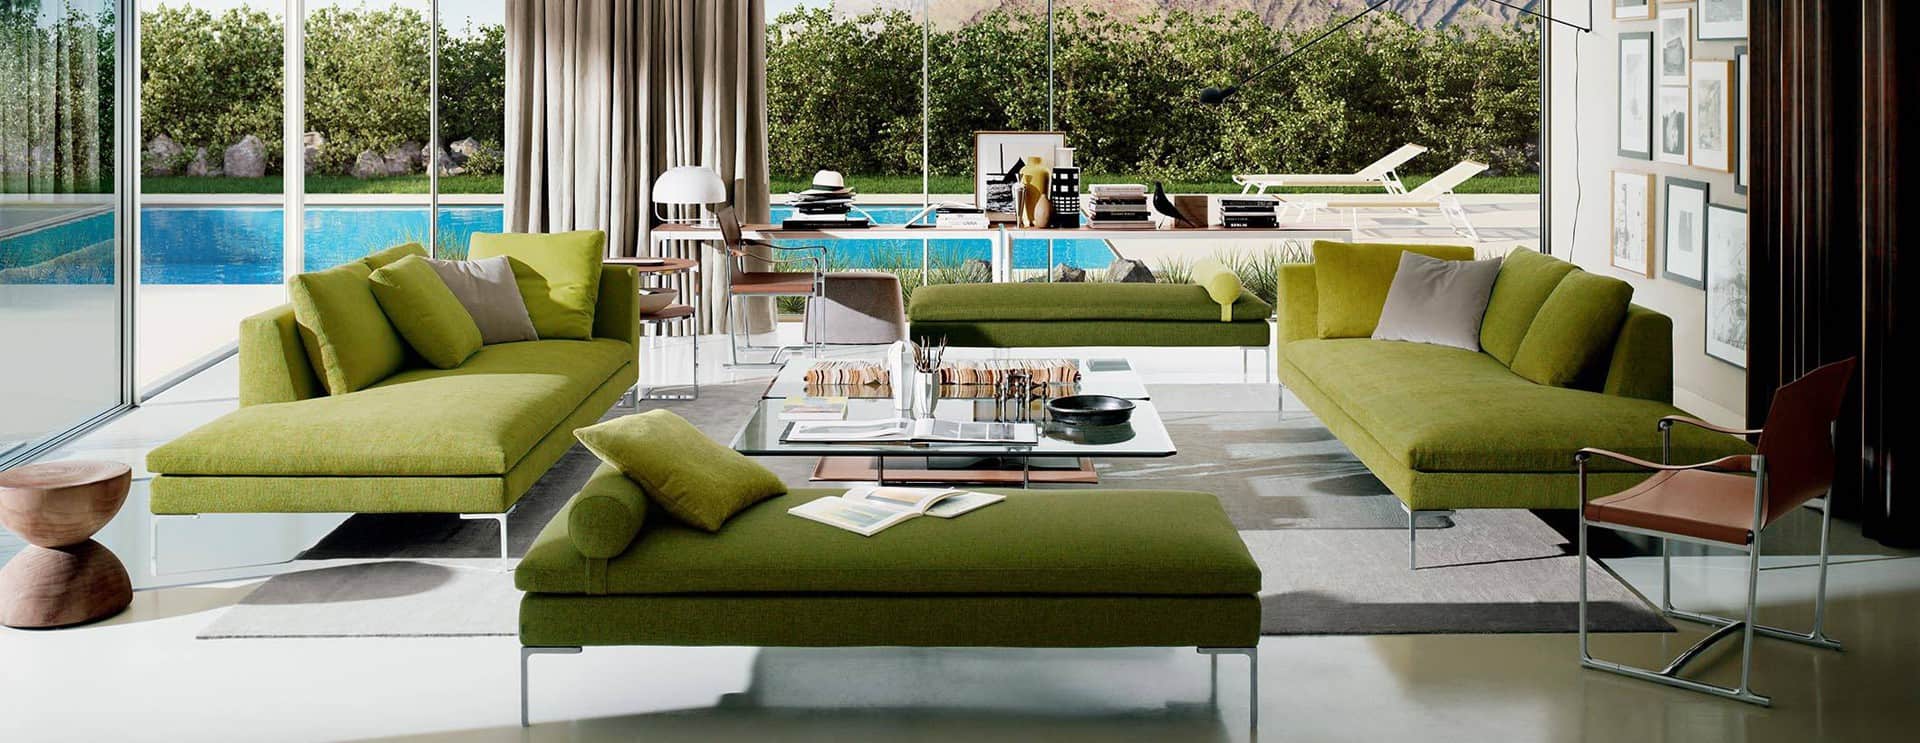 Interior Design: Professional Consultation from Cavallini1920. Great house with pool and authentic green furniture